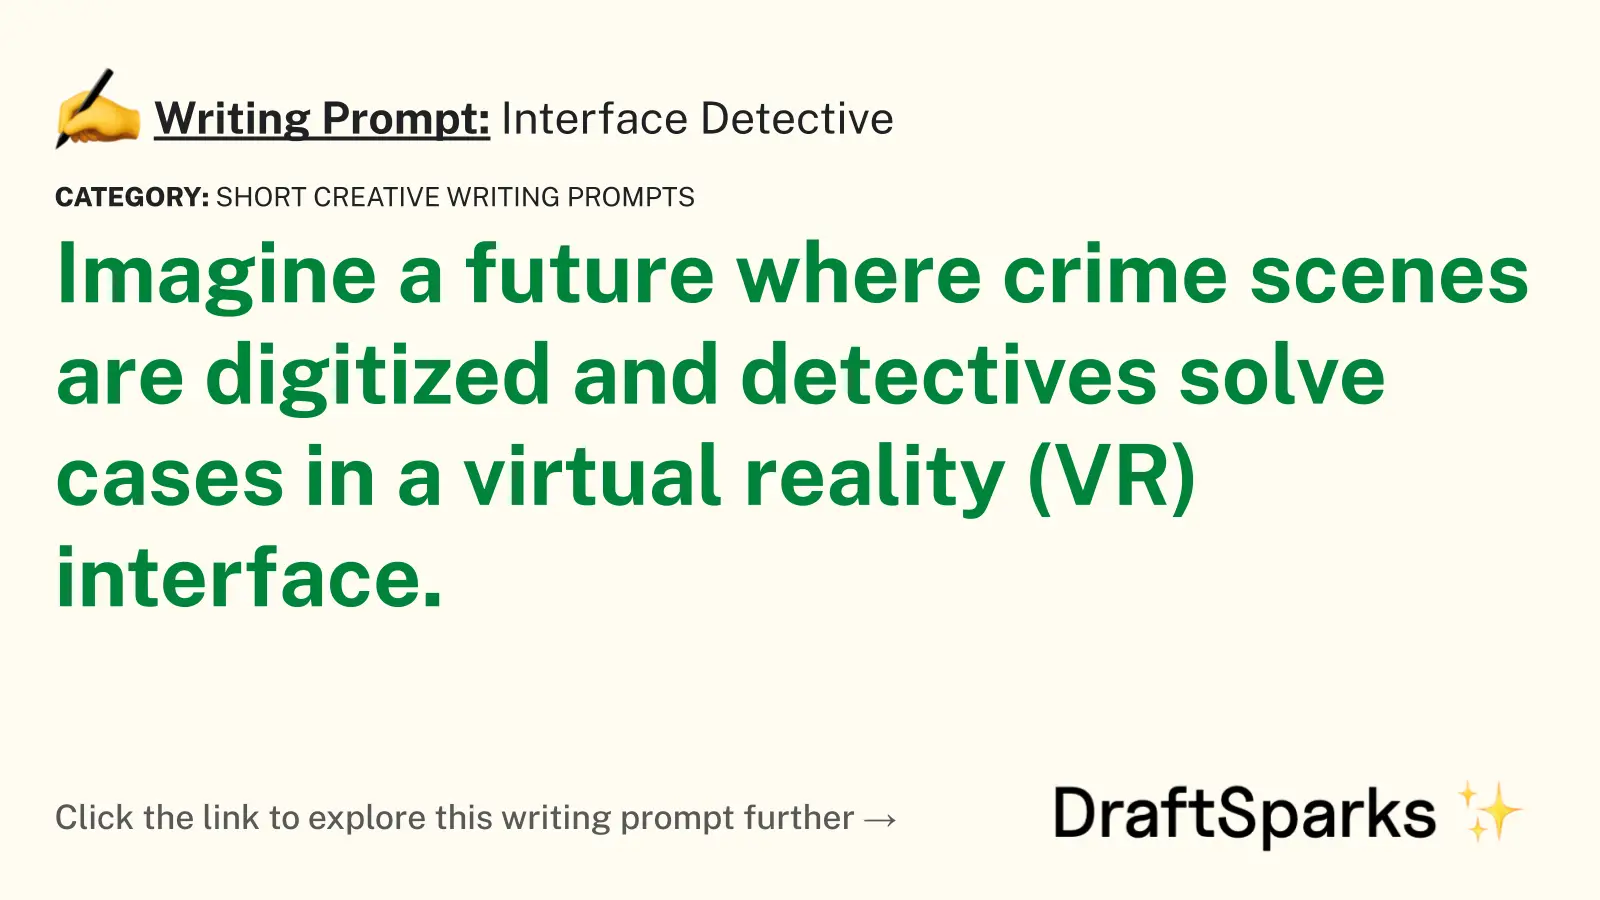 Interface Detective